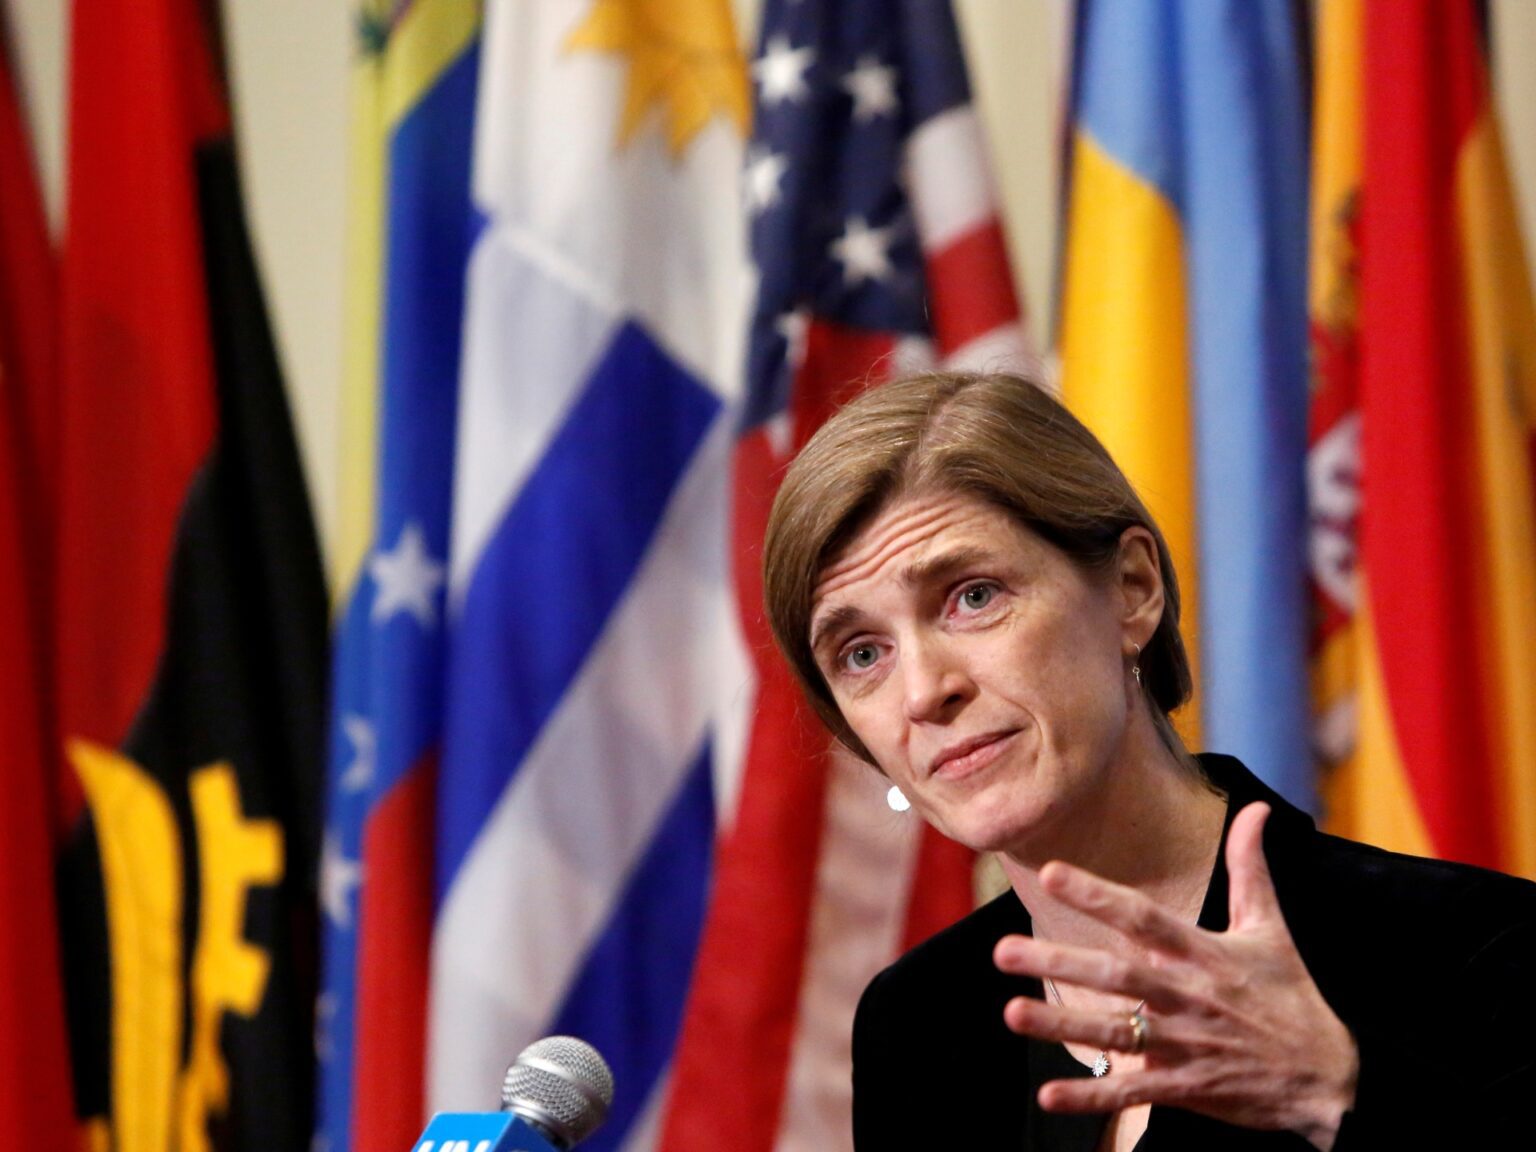 USAID chief says dedicated to helping Sudanese